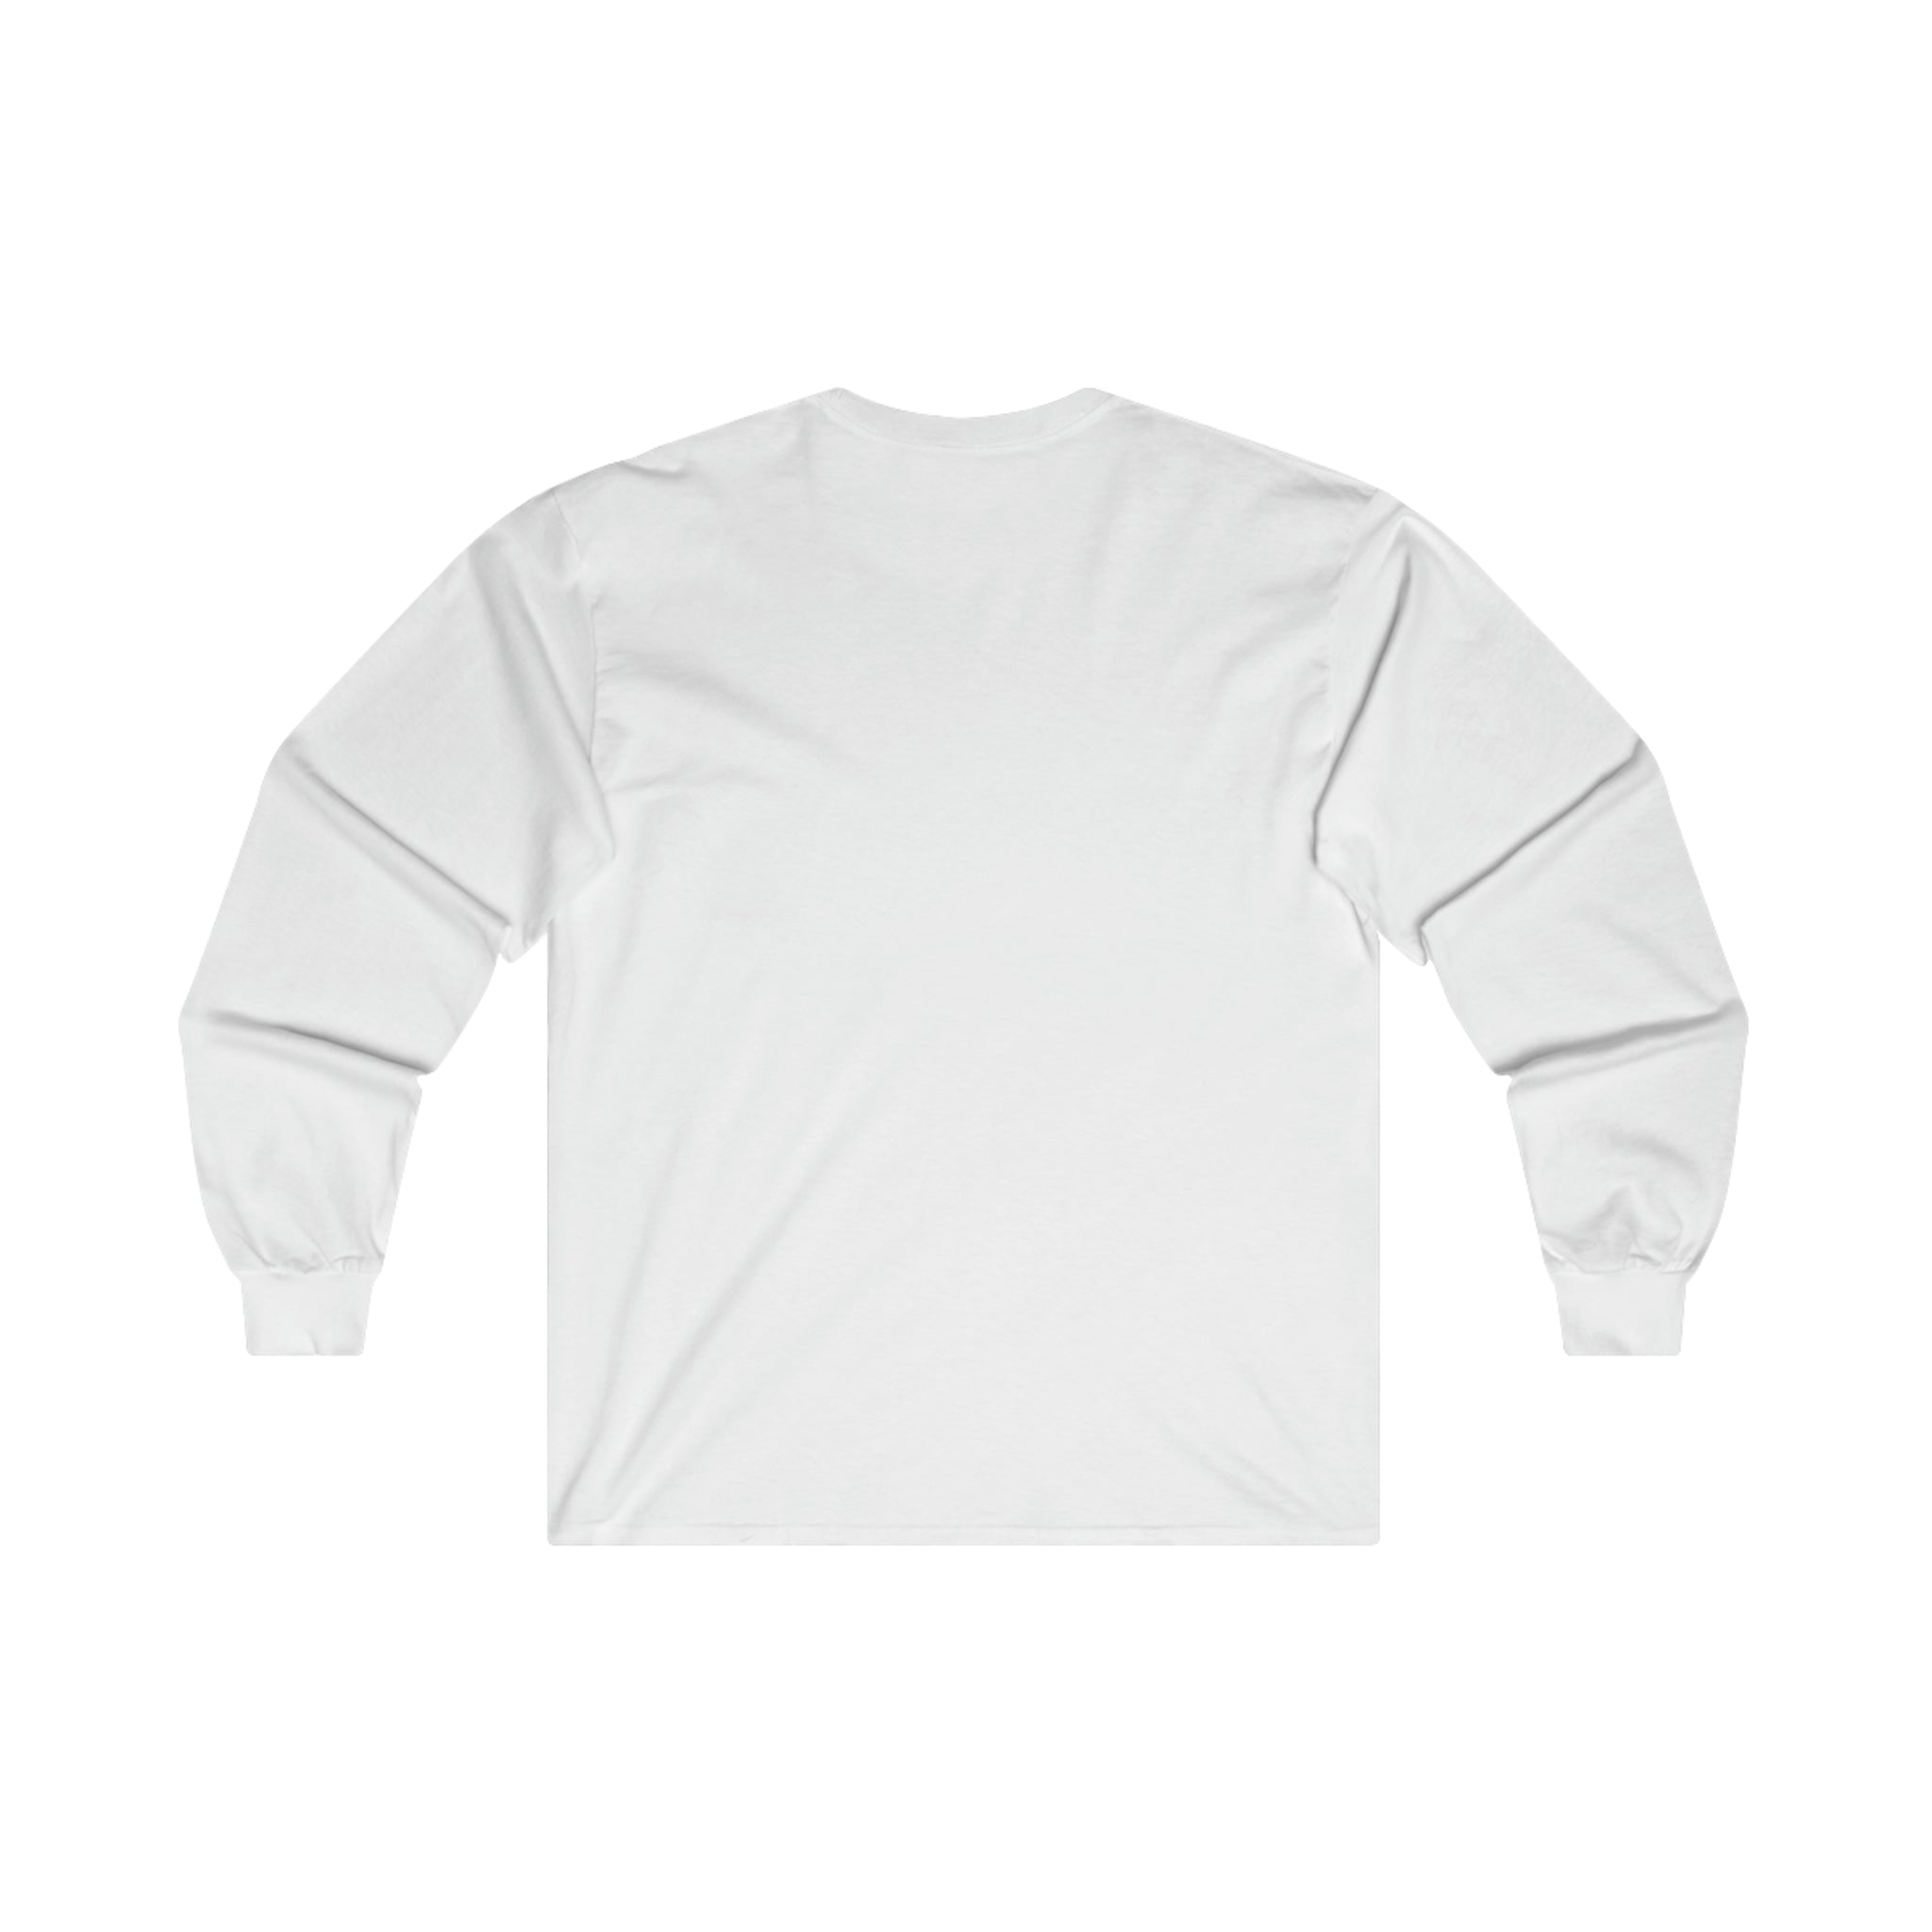 Romeo and Juliet 30 rack and chair - Ultra Cotton Long Sleeve Tee